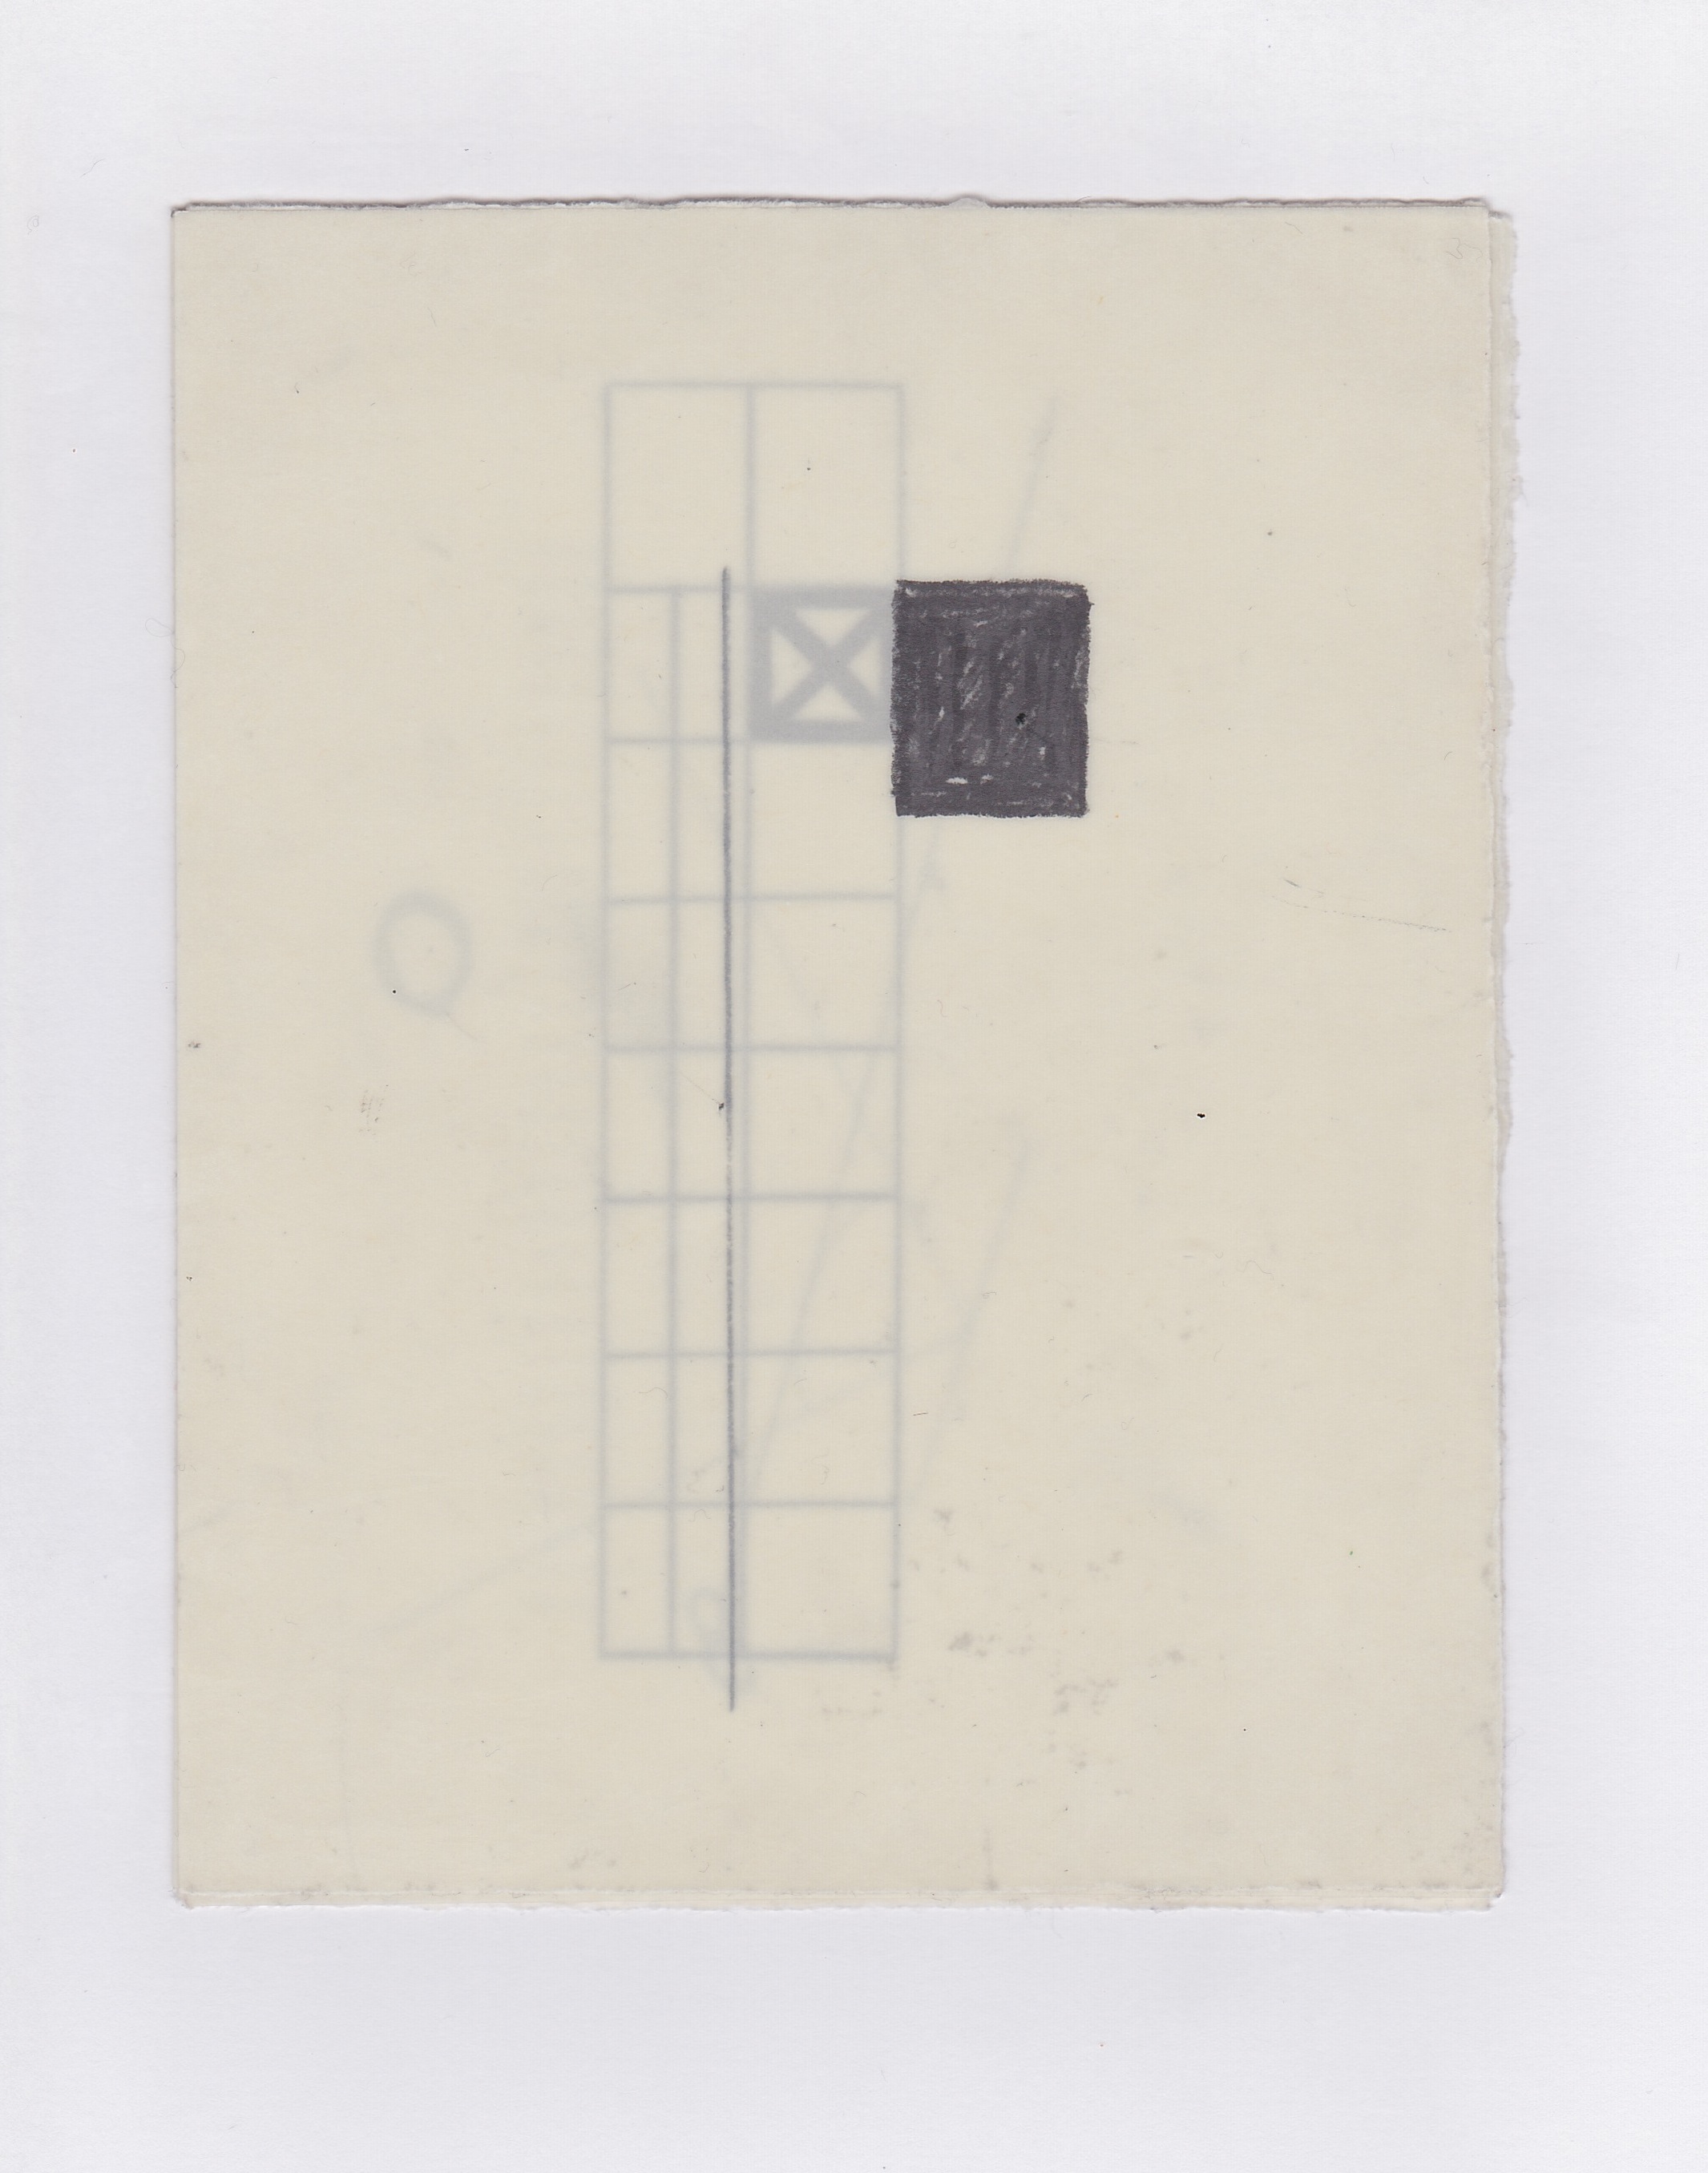 Untitled (the city, observations 07)  Pencil on oiled fabriano paper.  140mm x 180mm  December 2013.